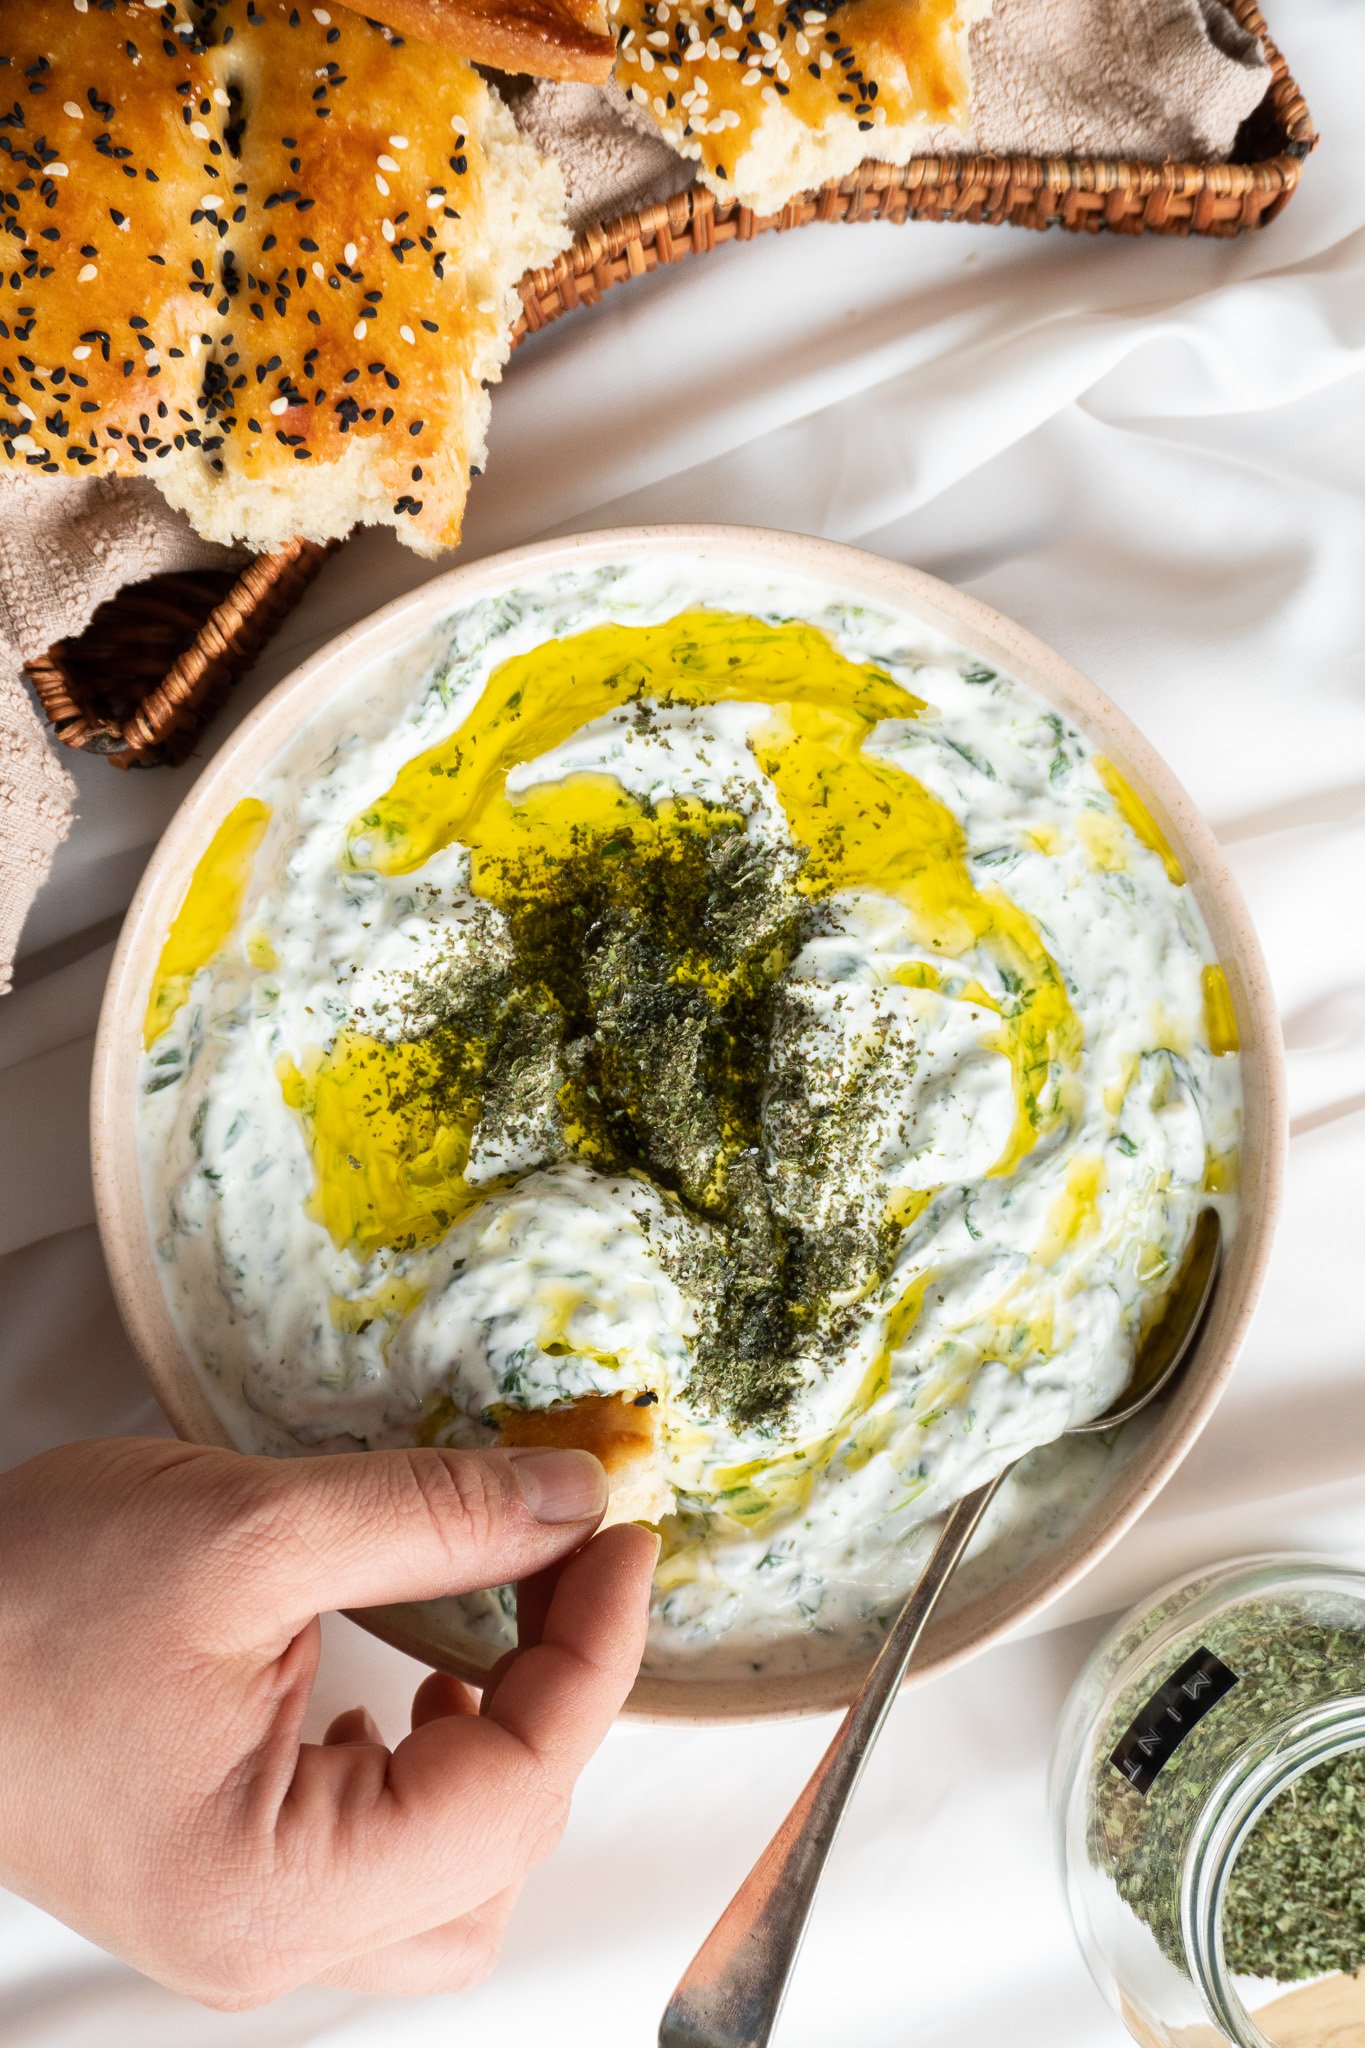 A bowl of Borani Esfenaj - Persian spinach yogurt dip a delicious and healthy Persian dip made with yogurt, spinach, and aromatic herbs. The dip has a vibrant green color and is served with crispy pita chips on the side.